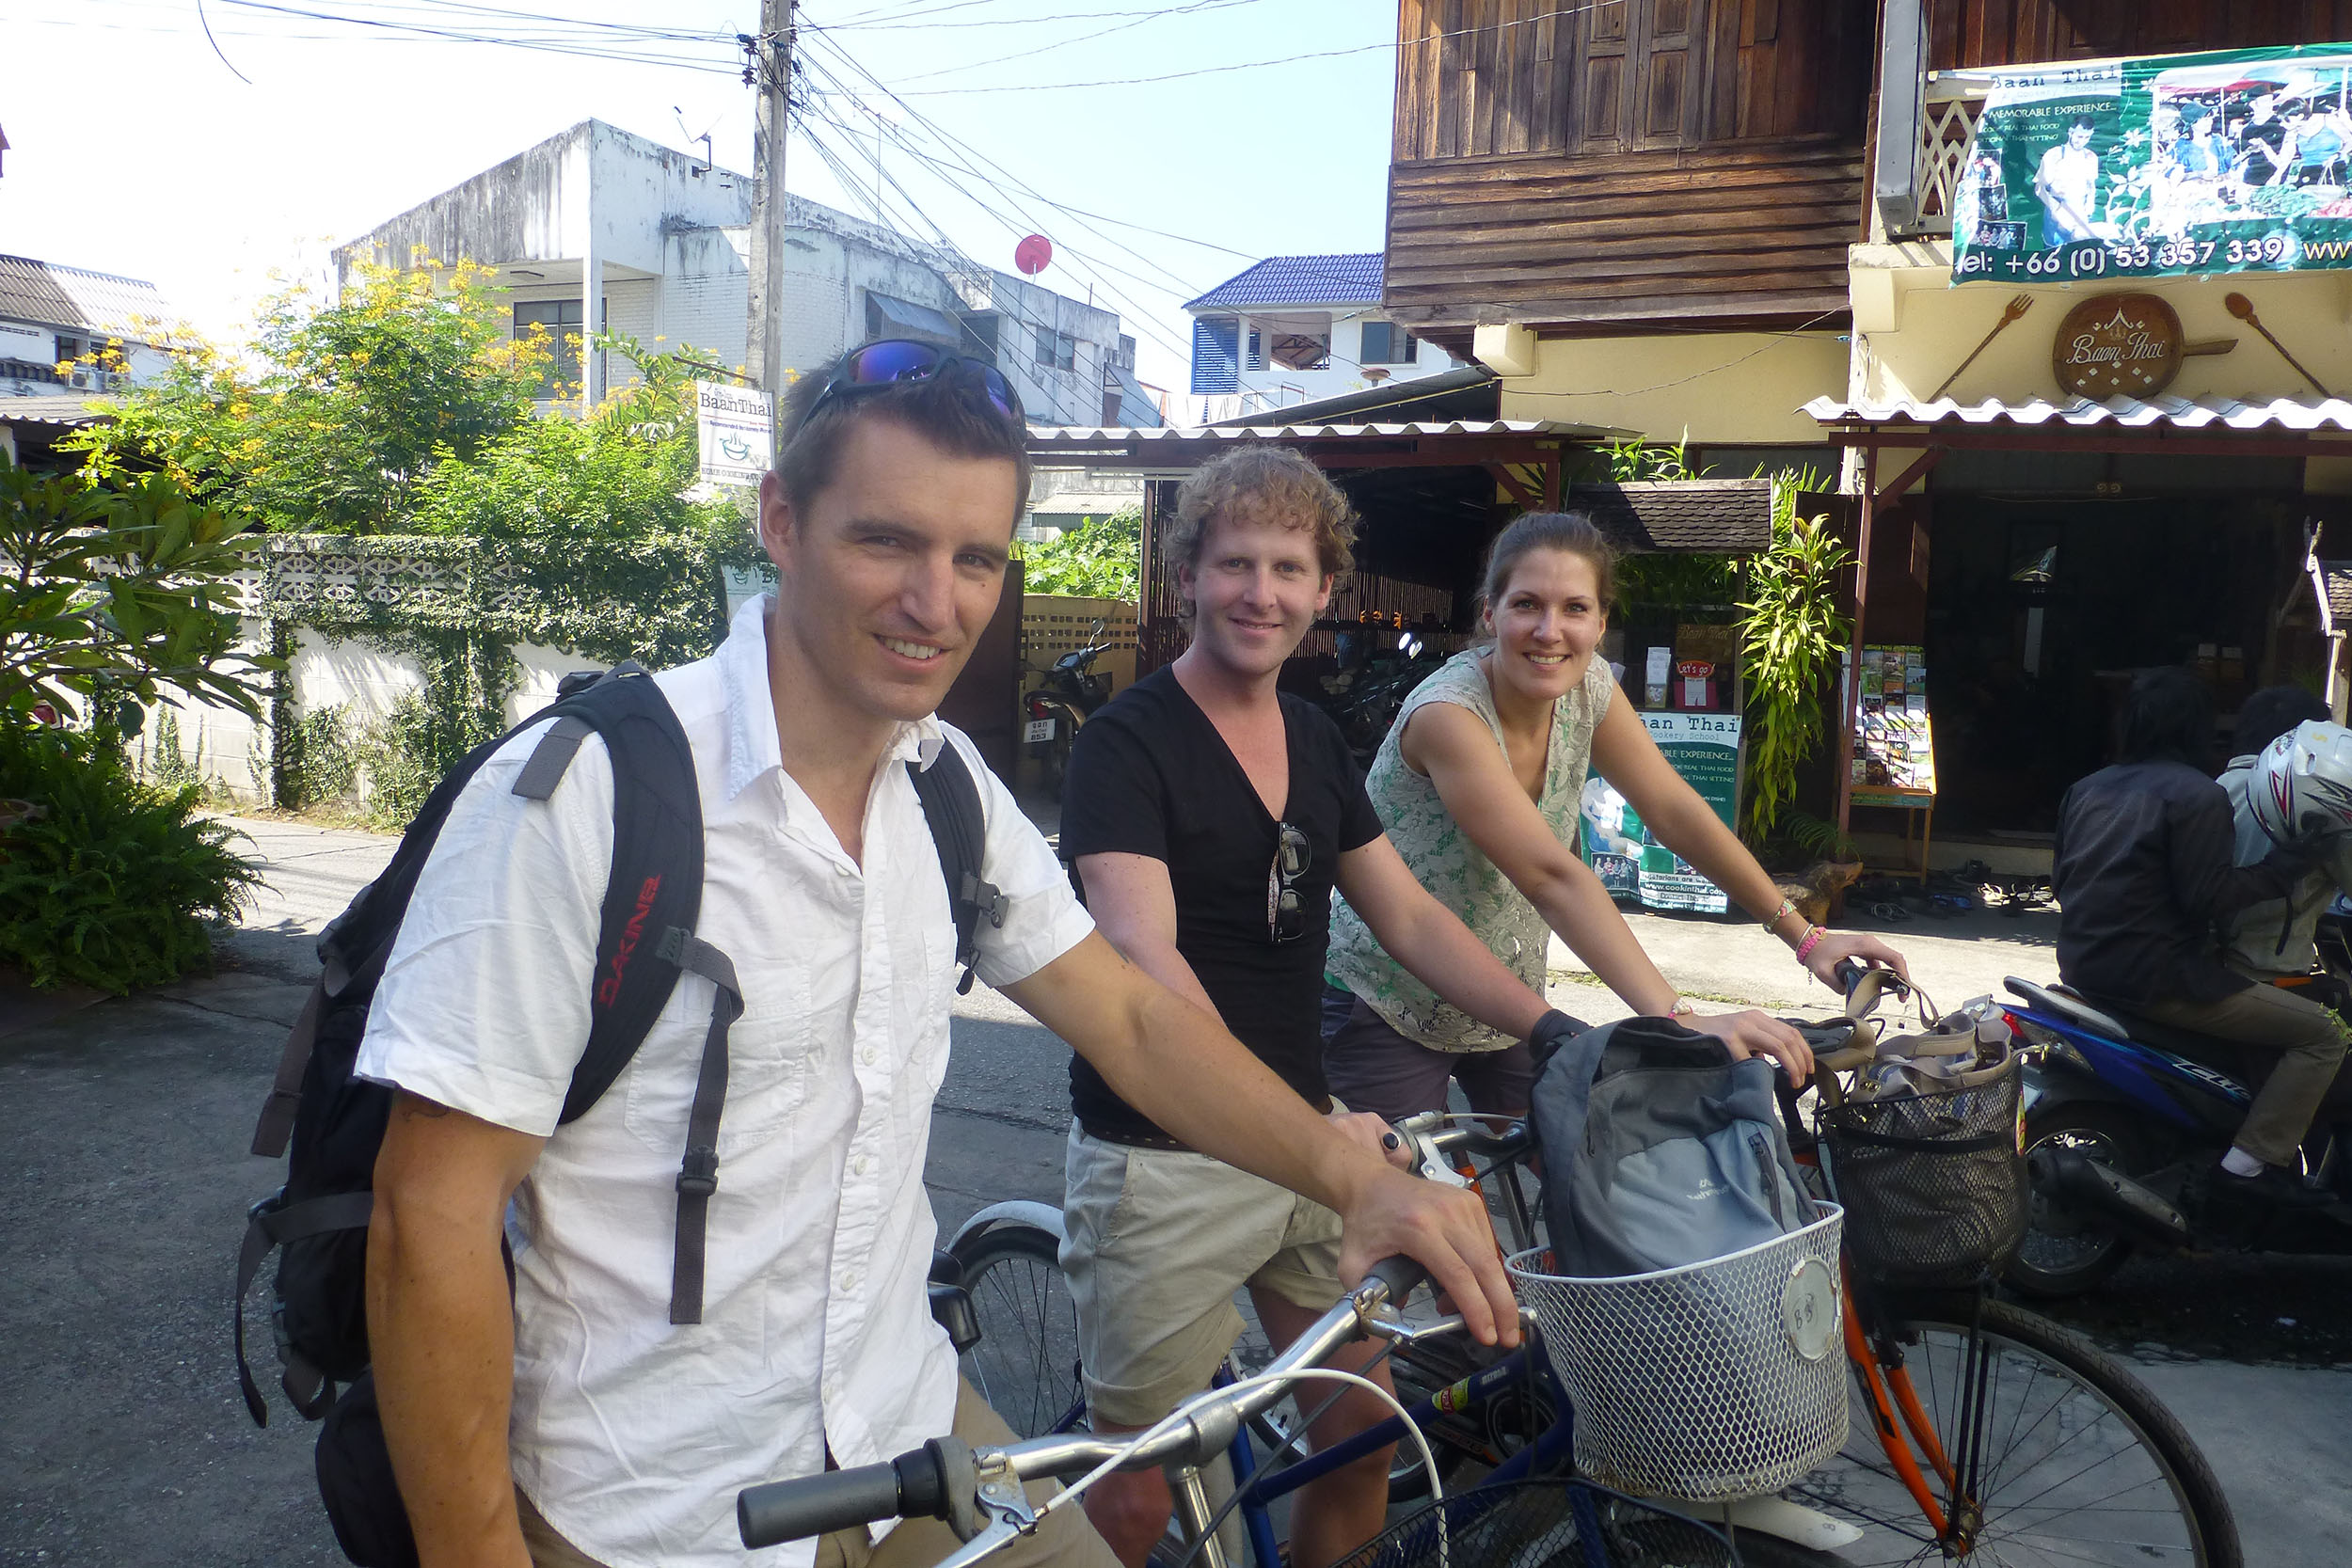 Ben riding a bicycle with new friends in Chiang Mai Thailand